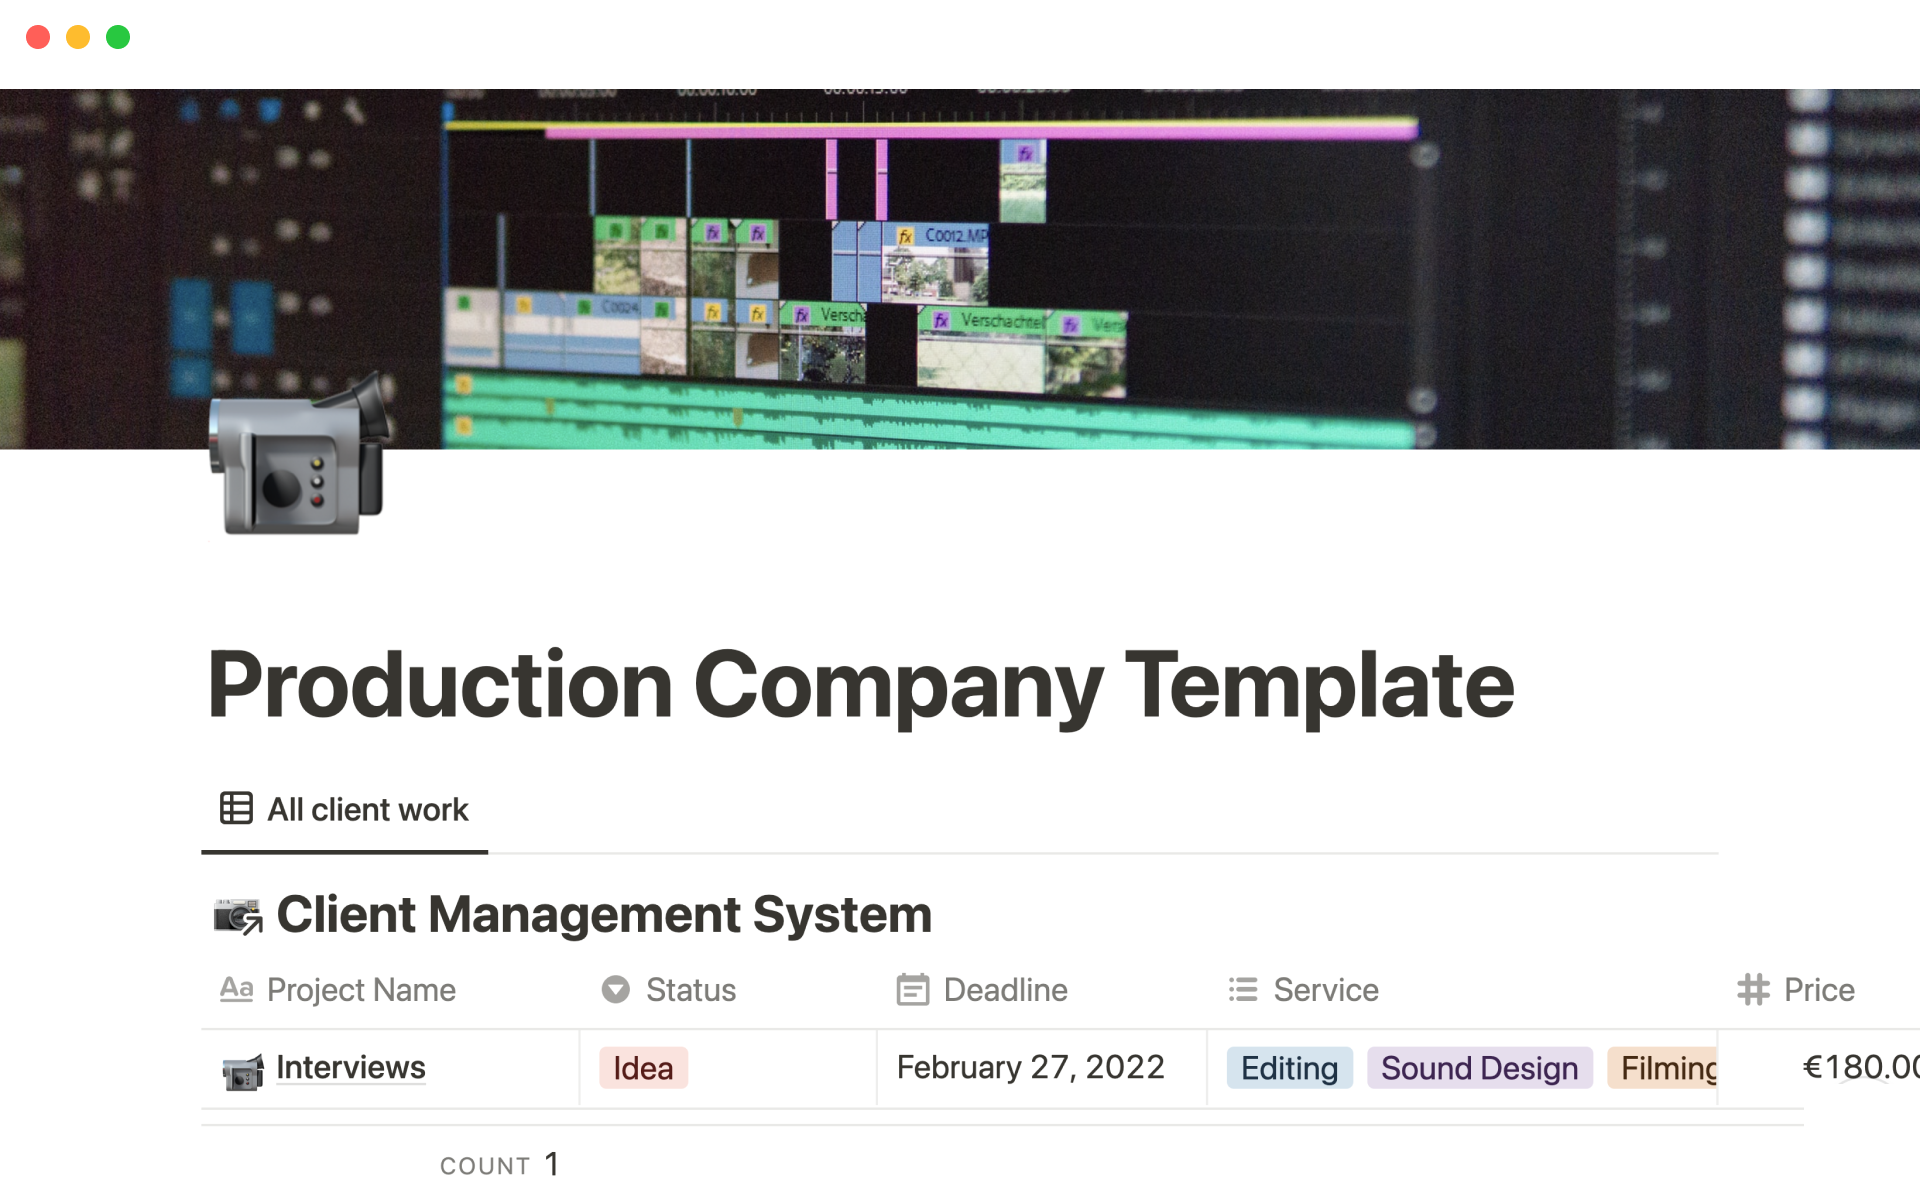 This template makes it easy for production companies to create and manage their clients and projects.